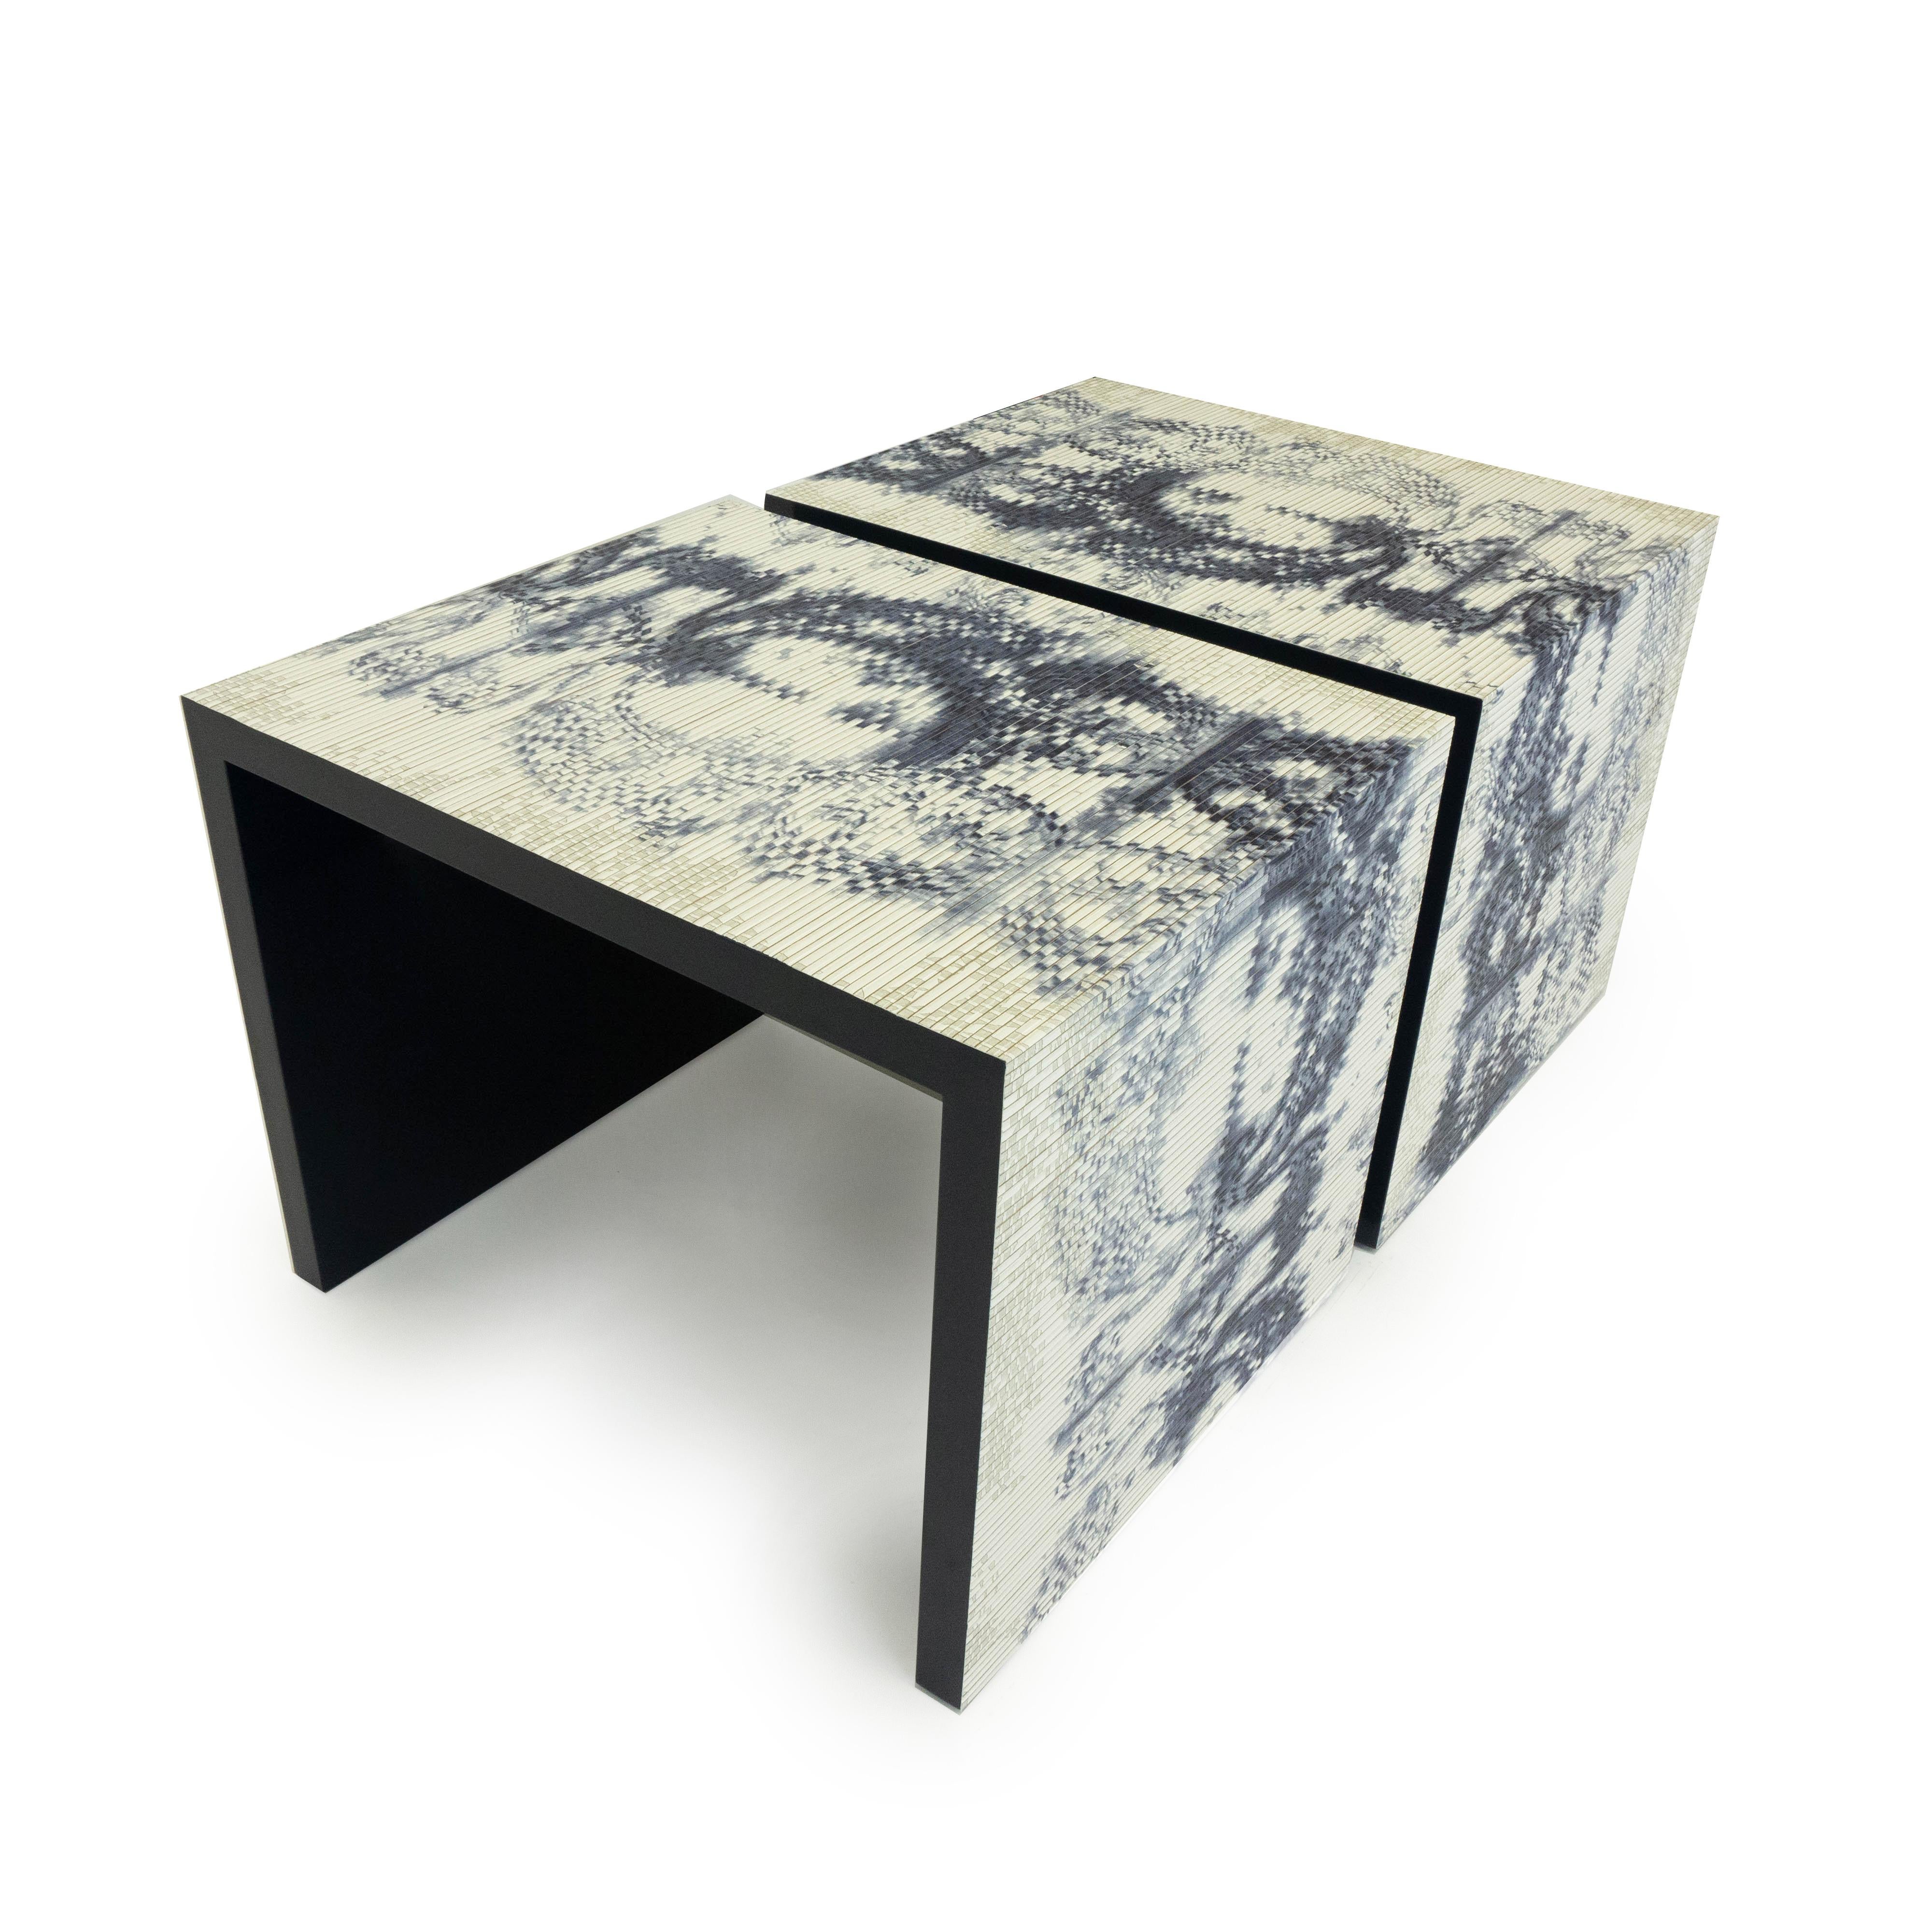 Modern Square Side Tables with Textured Print Finish In Excellent Condition For Sale In Greenwich, CT